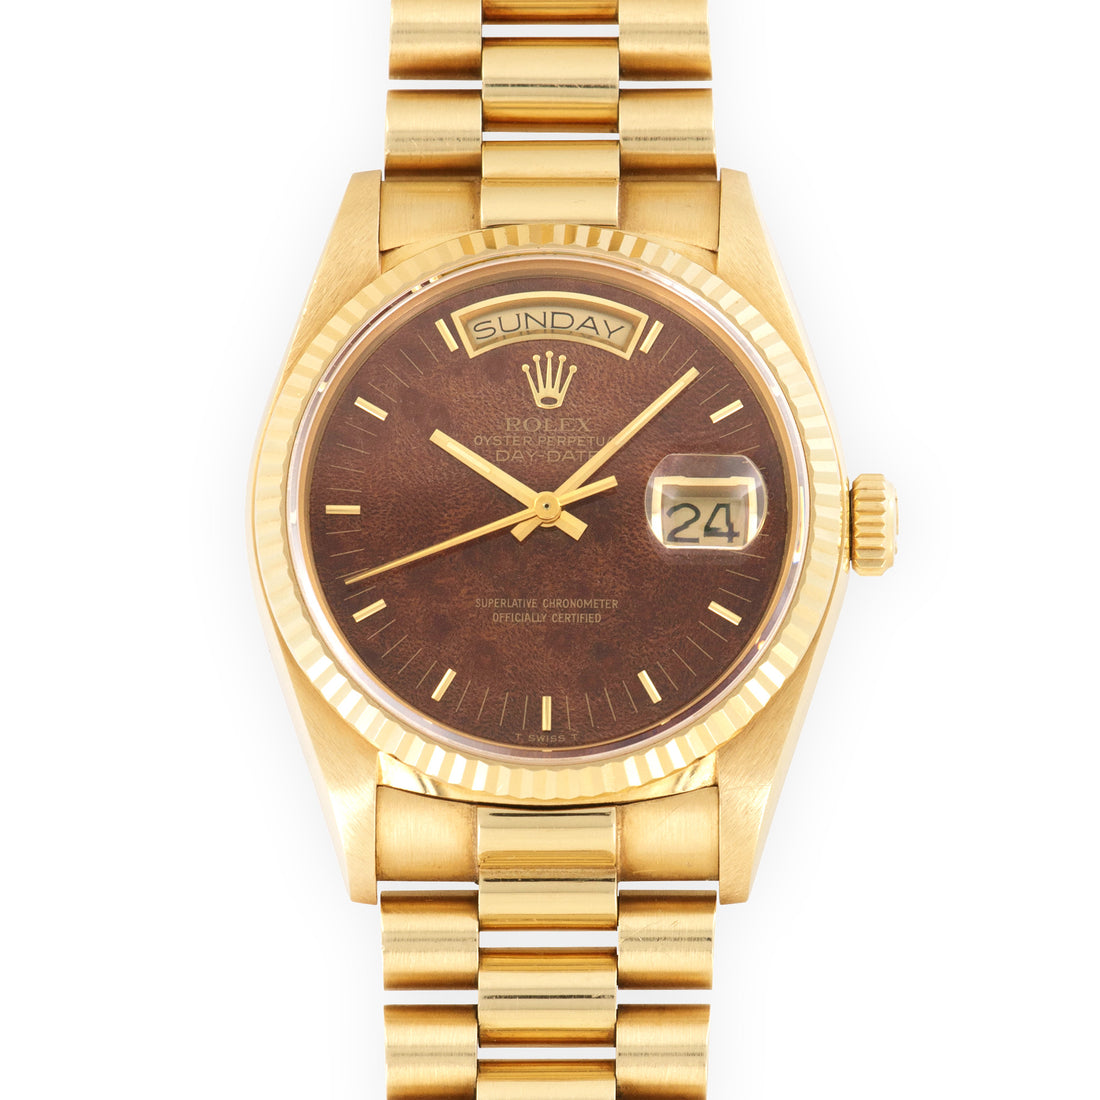 Rolex Yellow Gold Day-Date Wood Dial Watch Ref. 18038